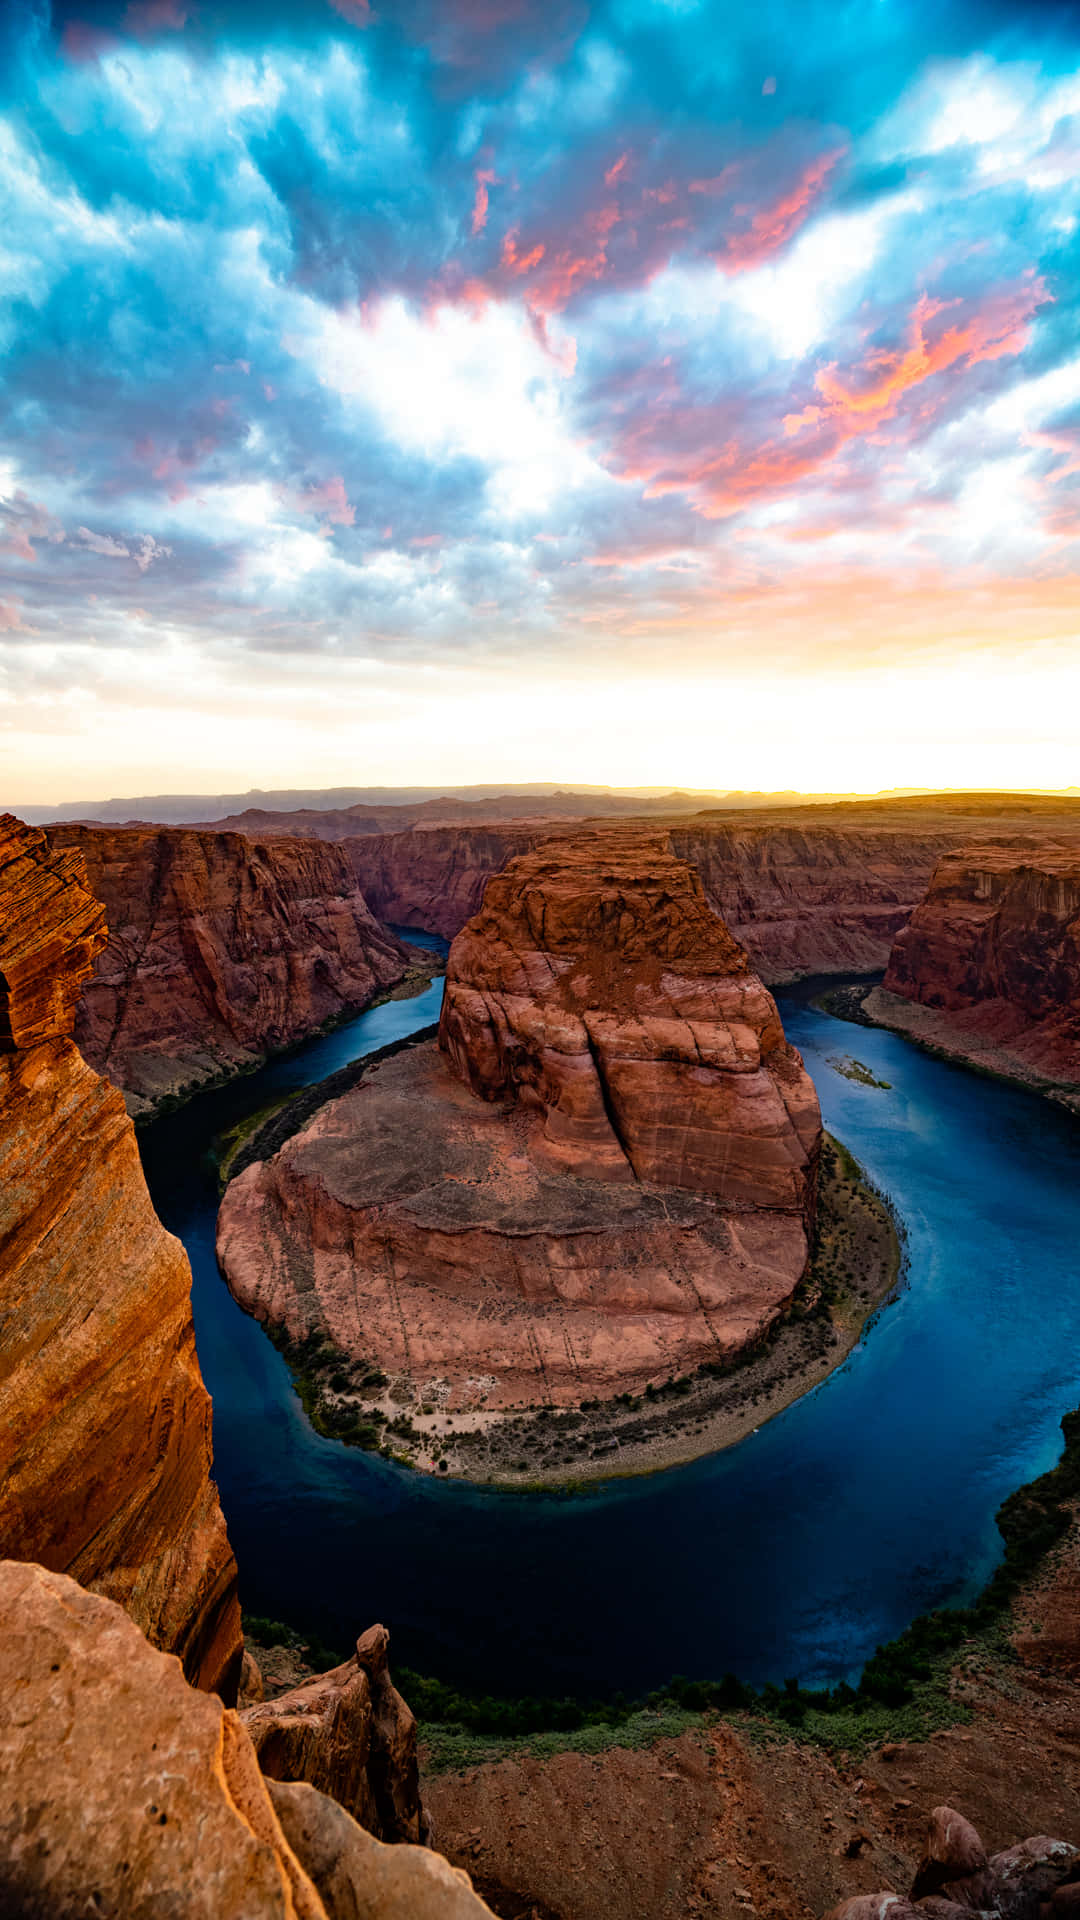 A Sunset Over The River In Horseshoe Canyon Wallpaper